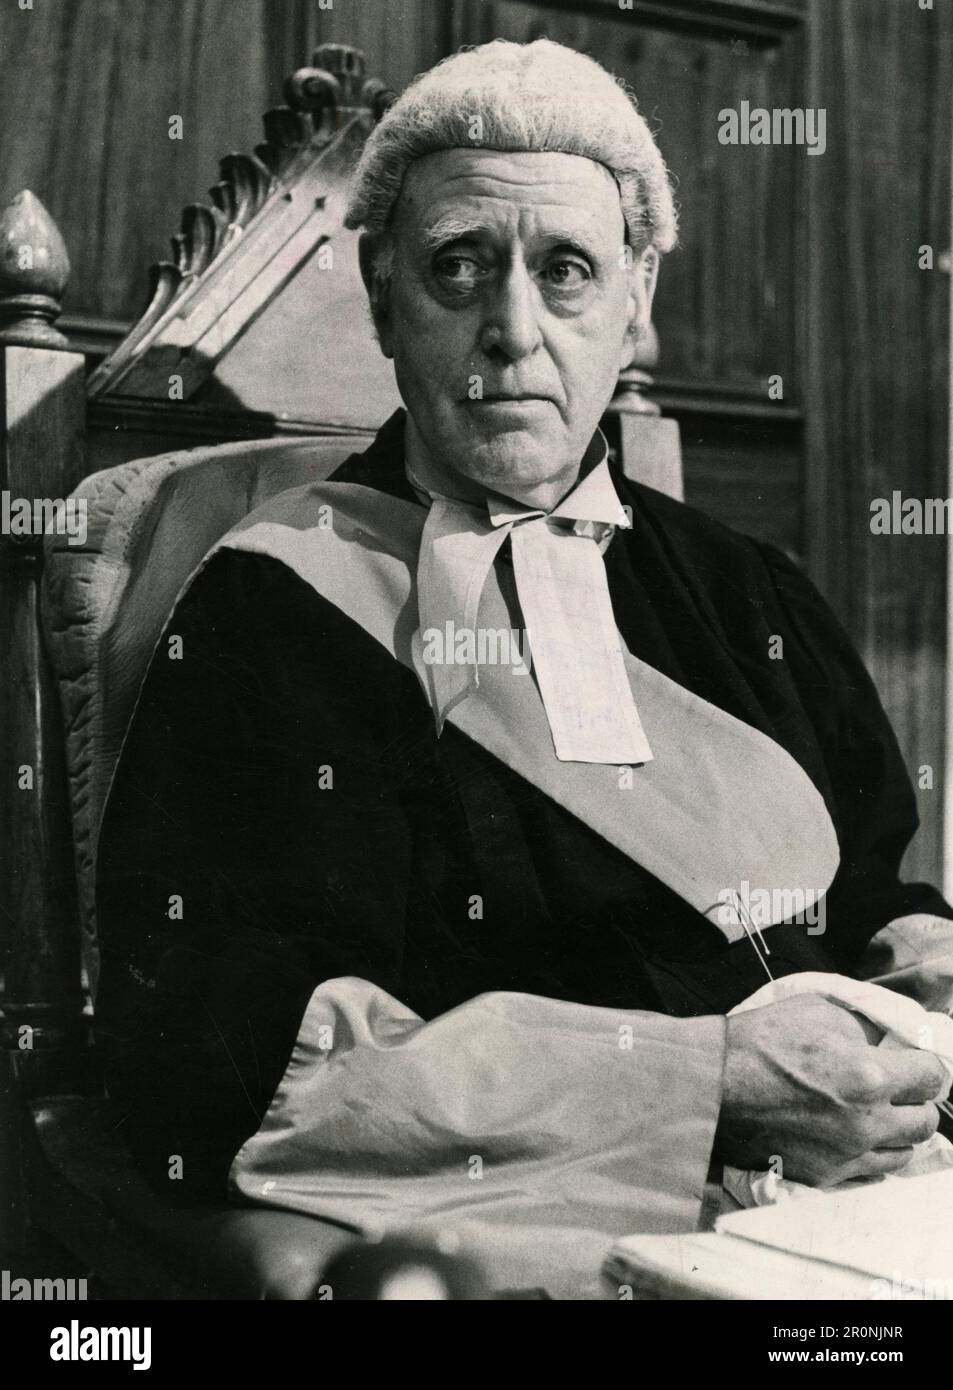 Actor Alastair Sim in the TV series Misleading Cases, UK 1968 Stock Photo